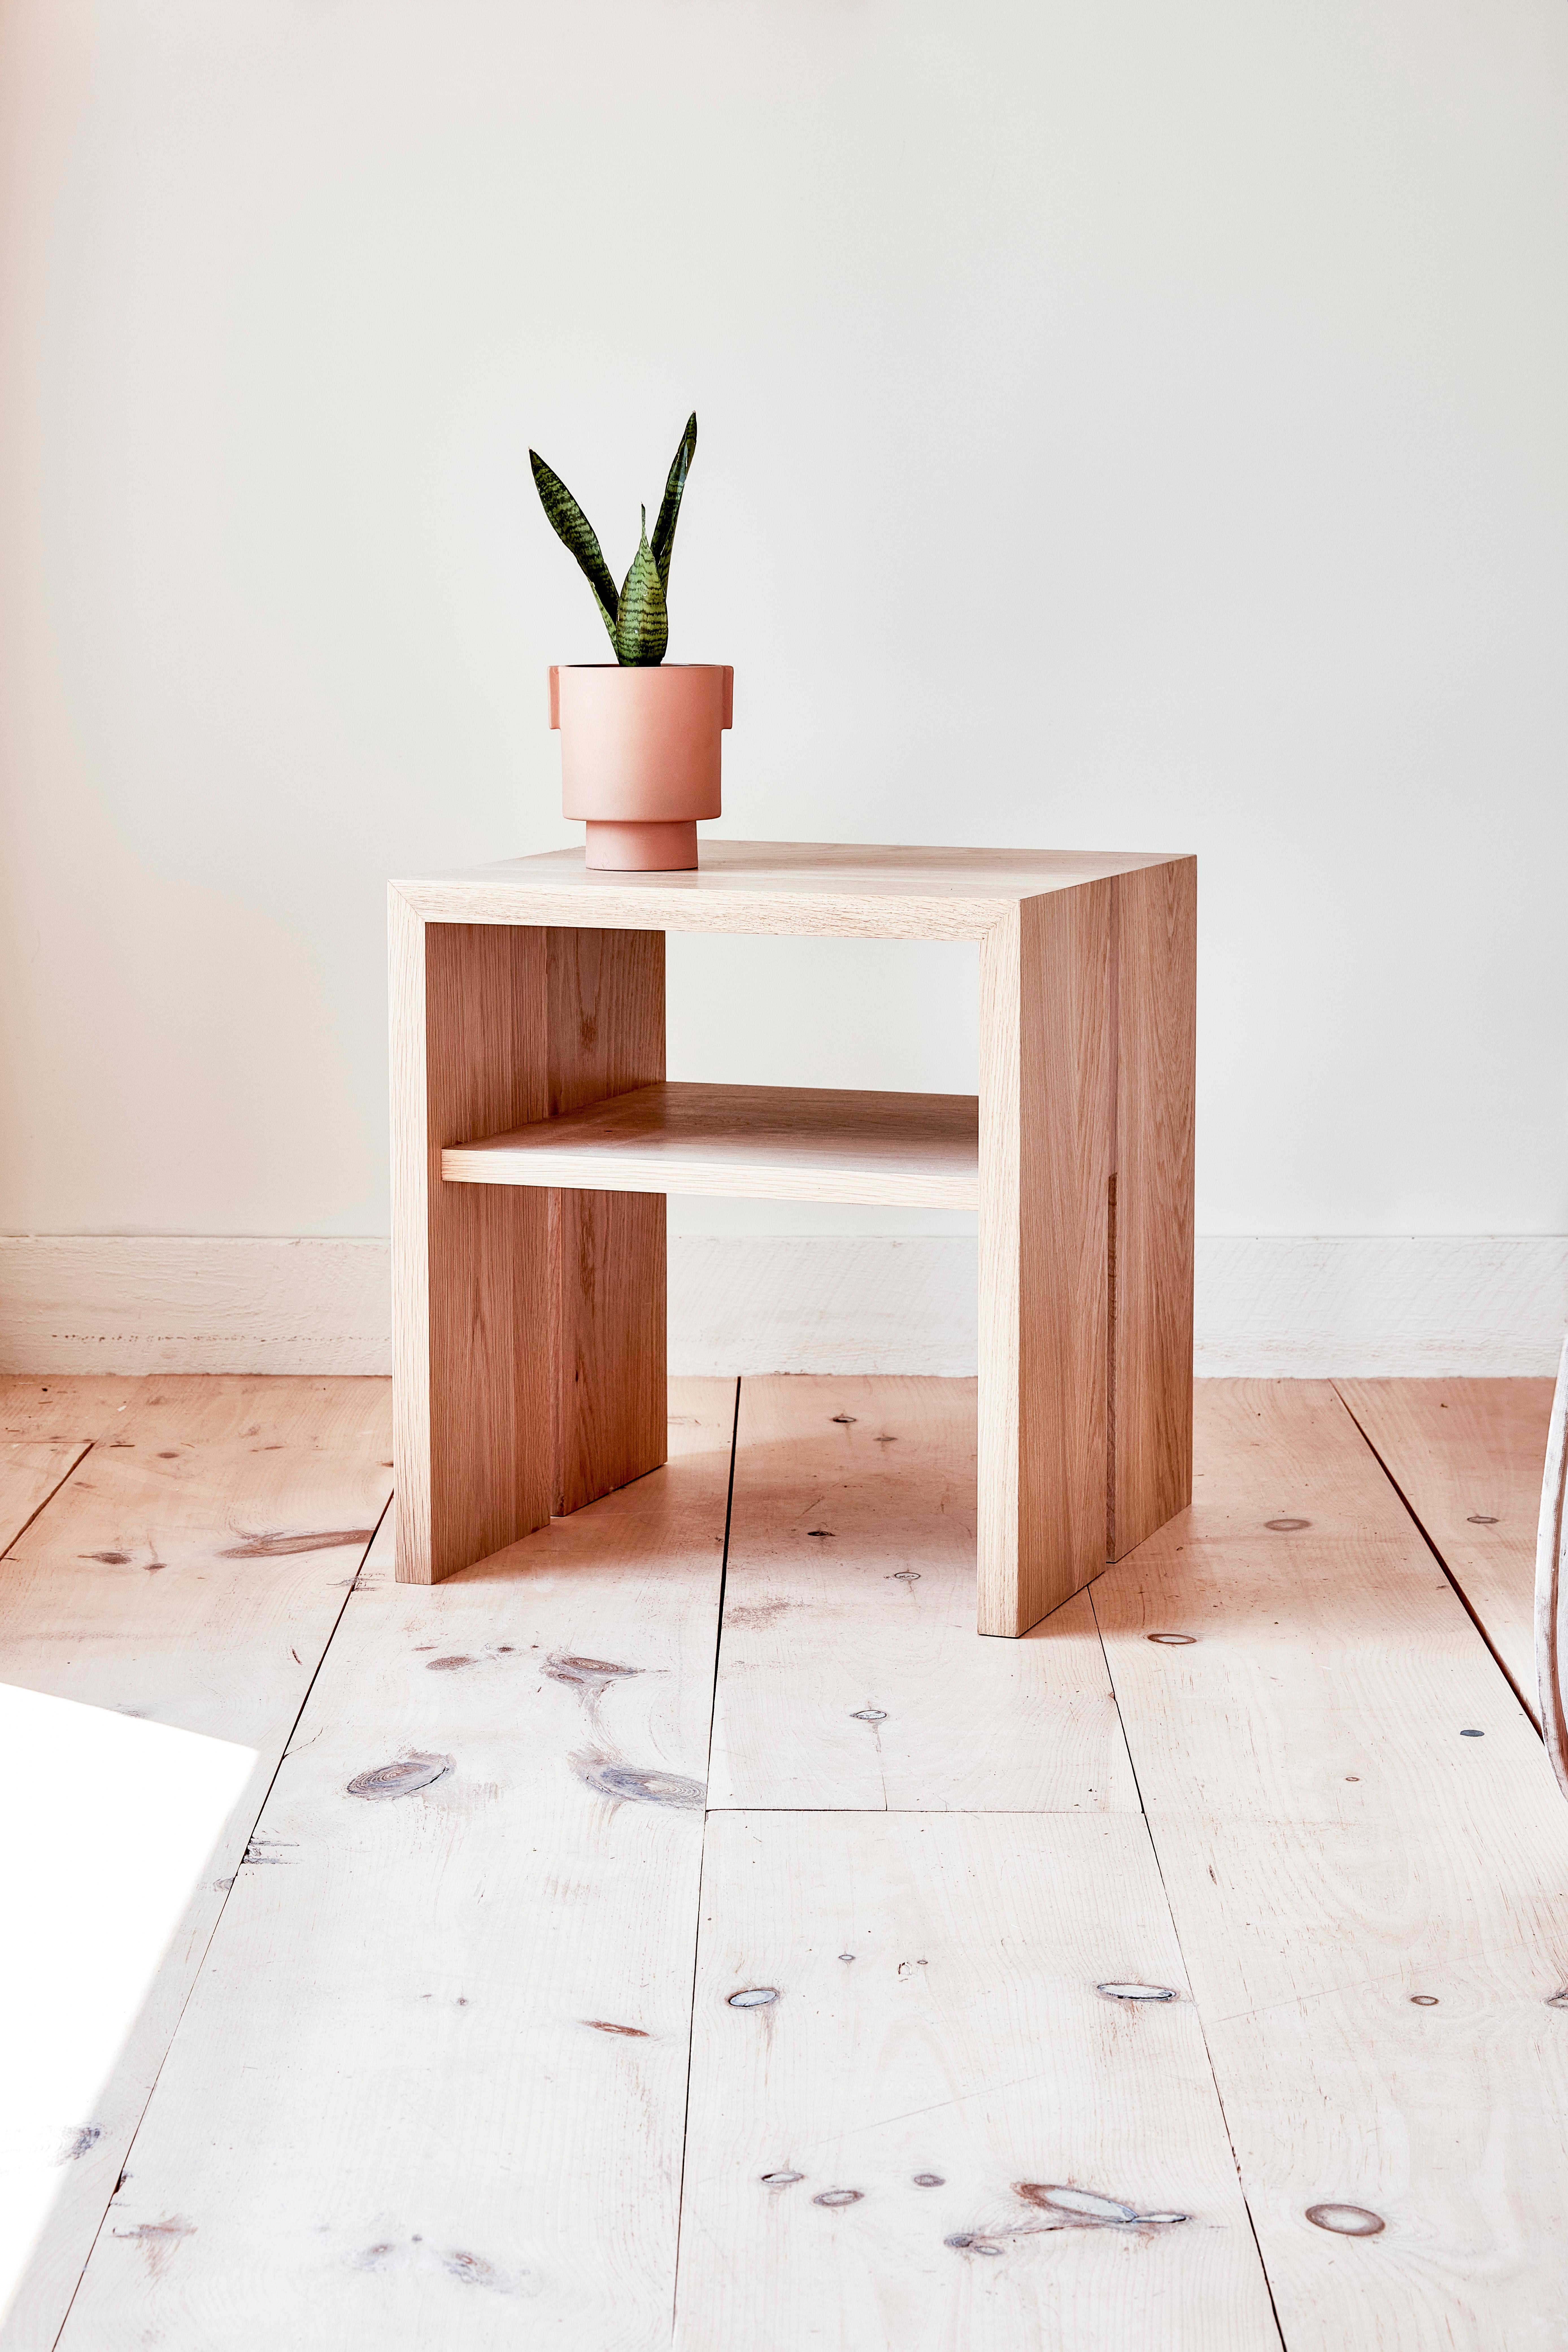 This wooden side table is hand-made in the United States with all hardwood construction. Characterized by its striking waterfall design, unique split leg detail, and convenient storage shelf, the Jameson natural wood side table is distinguished with